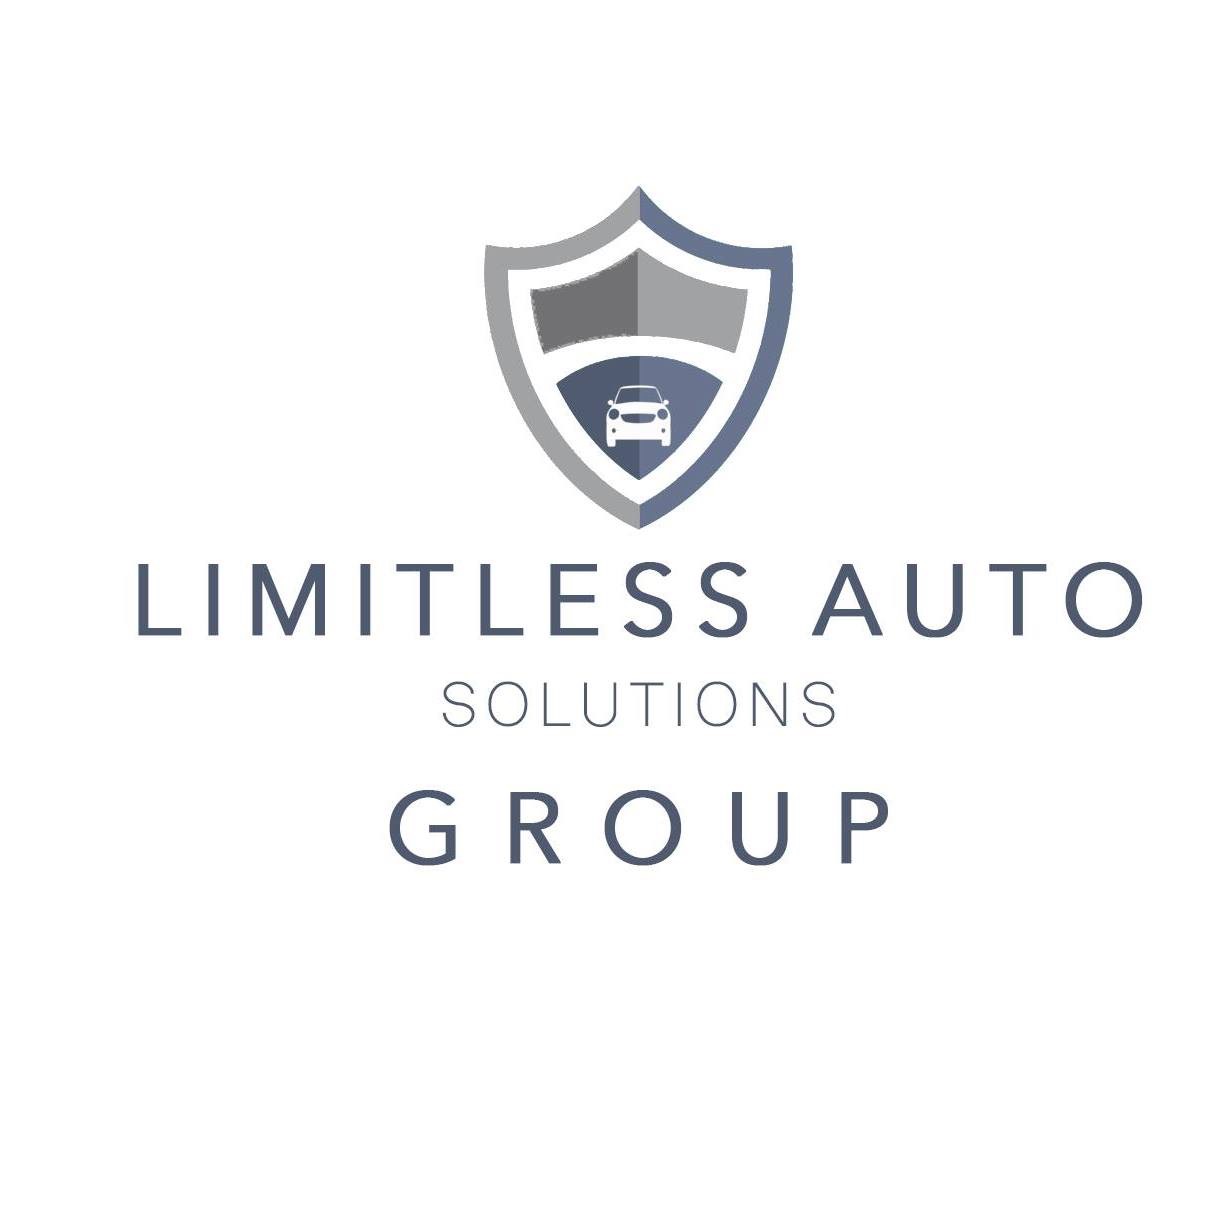 Limitless Auto Solutions Group